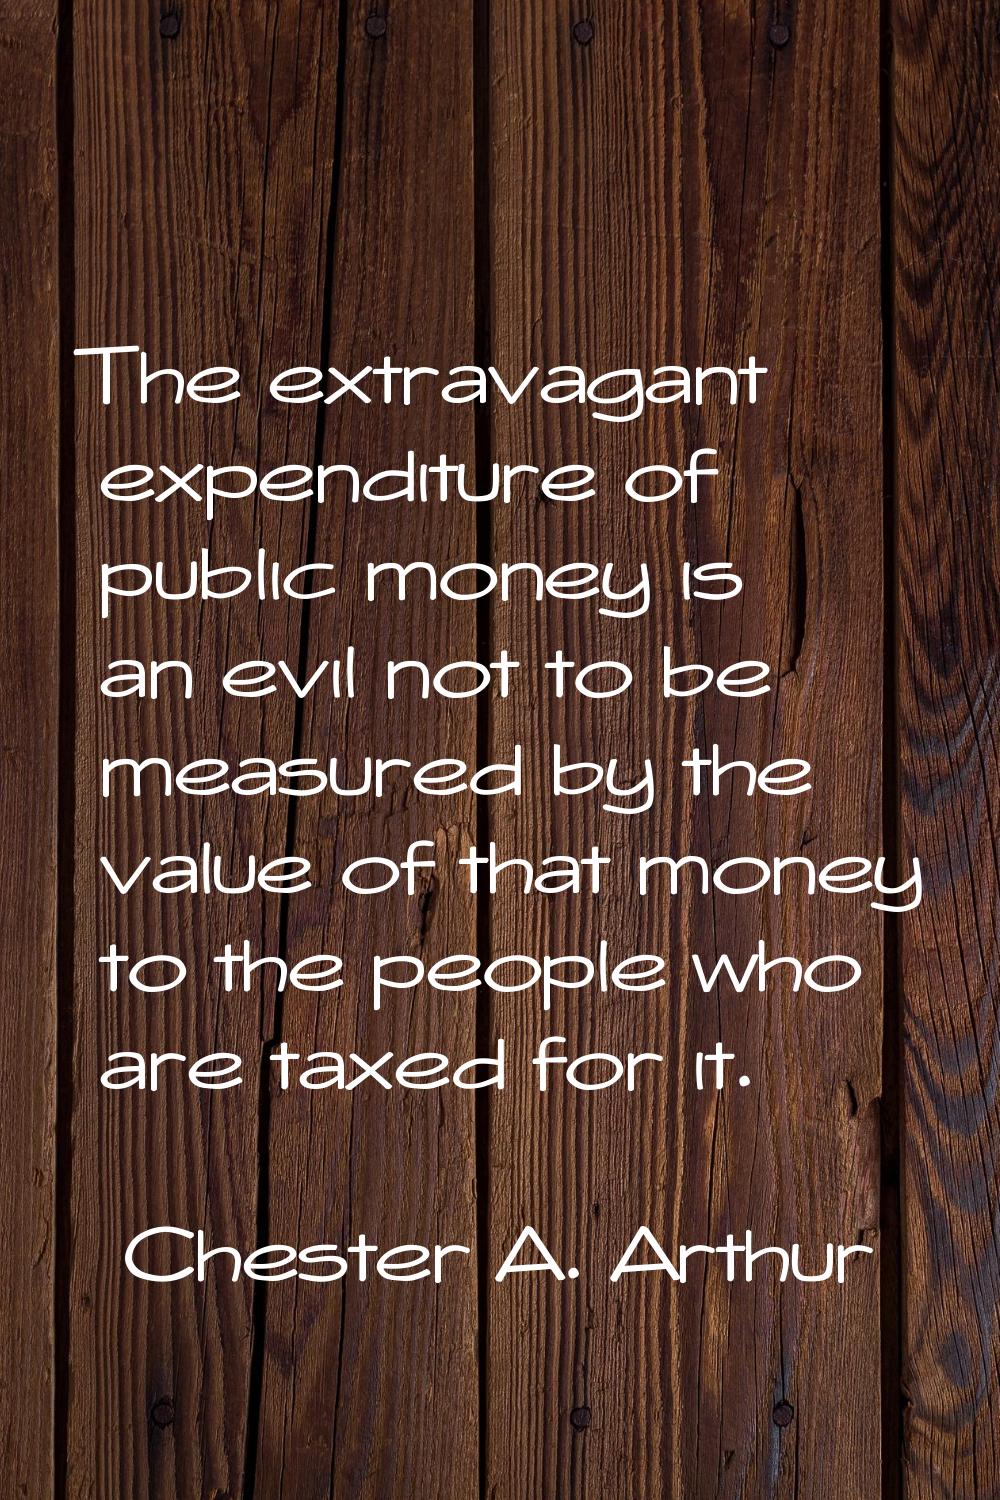 The extravagant expenditure of public money is an evil not to be measured by the value of that mone